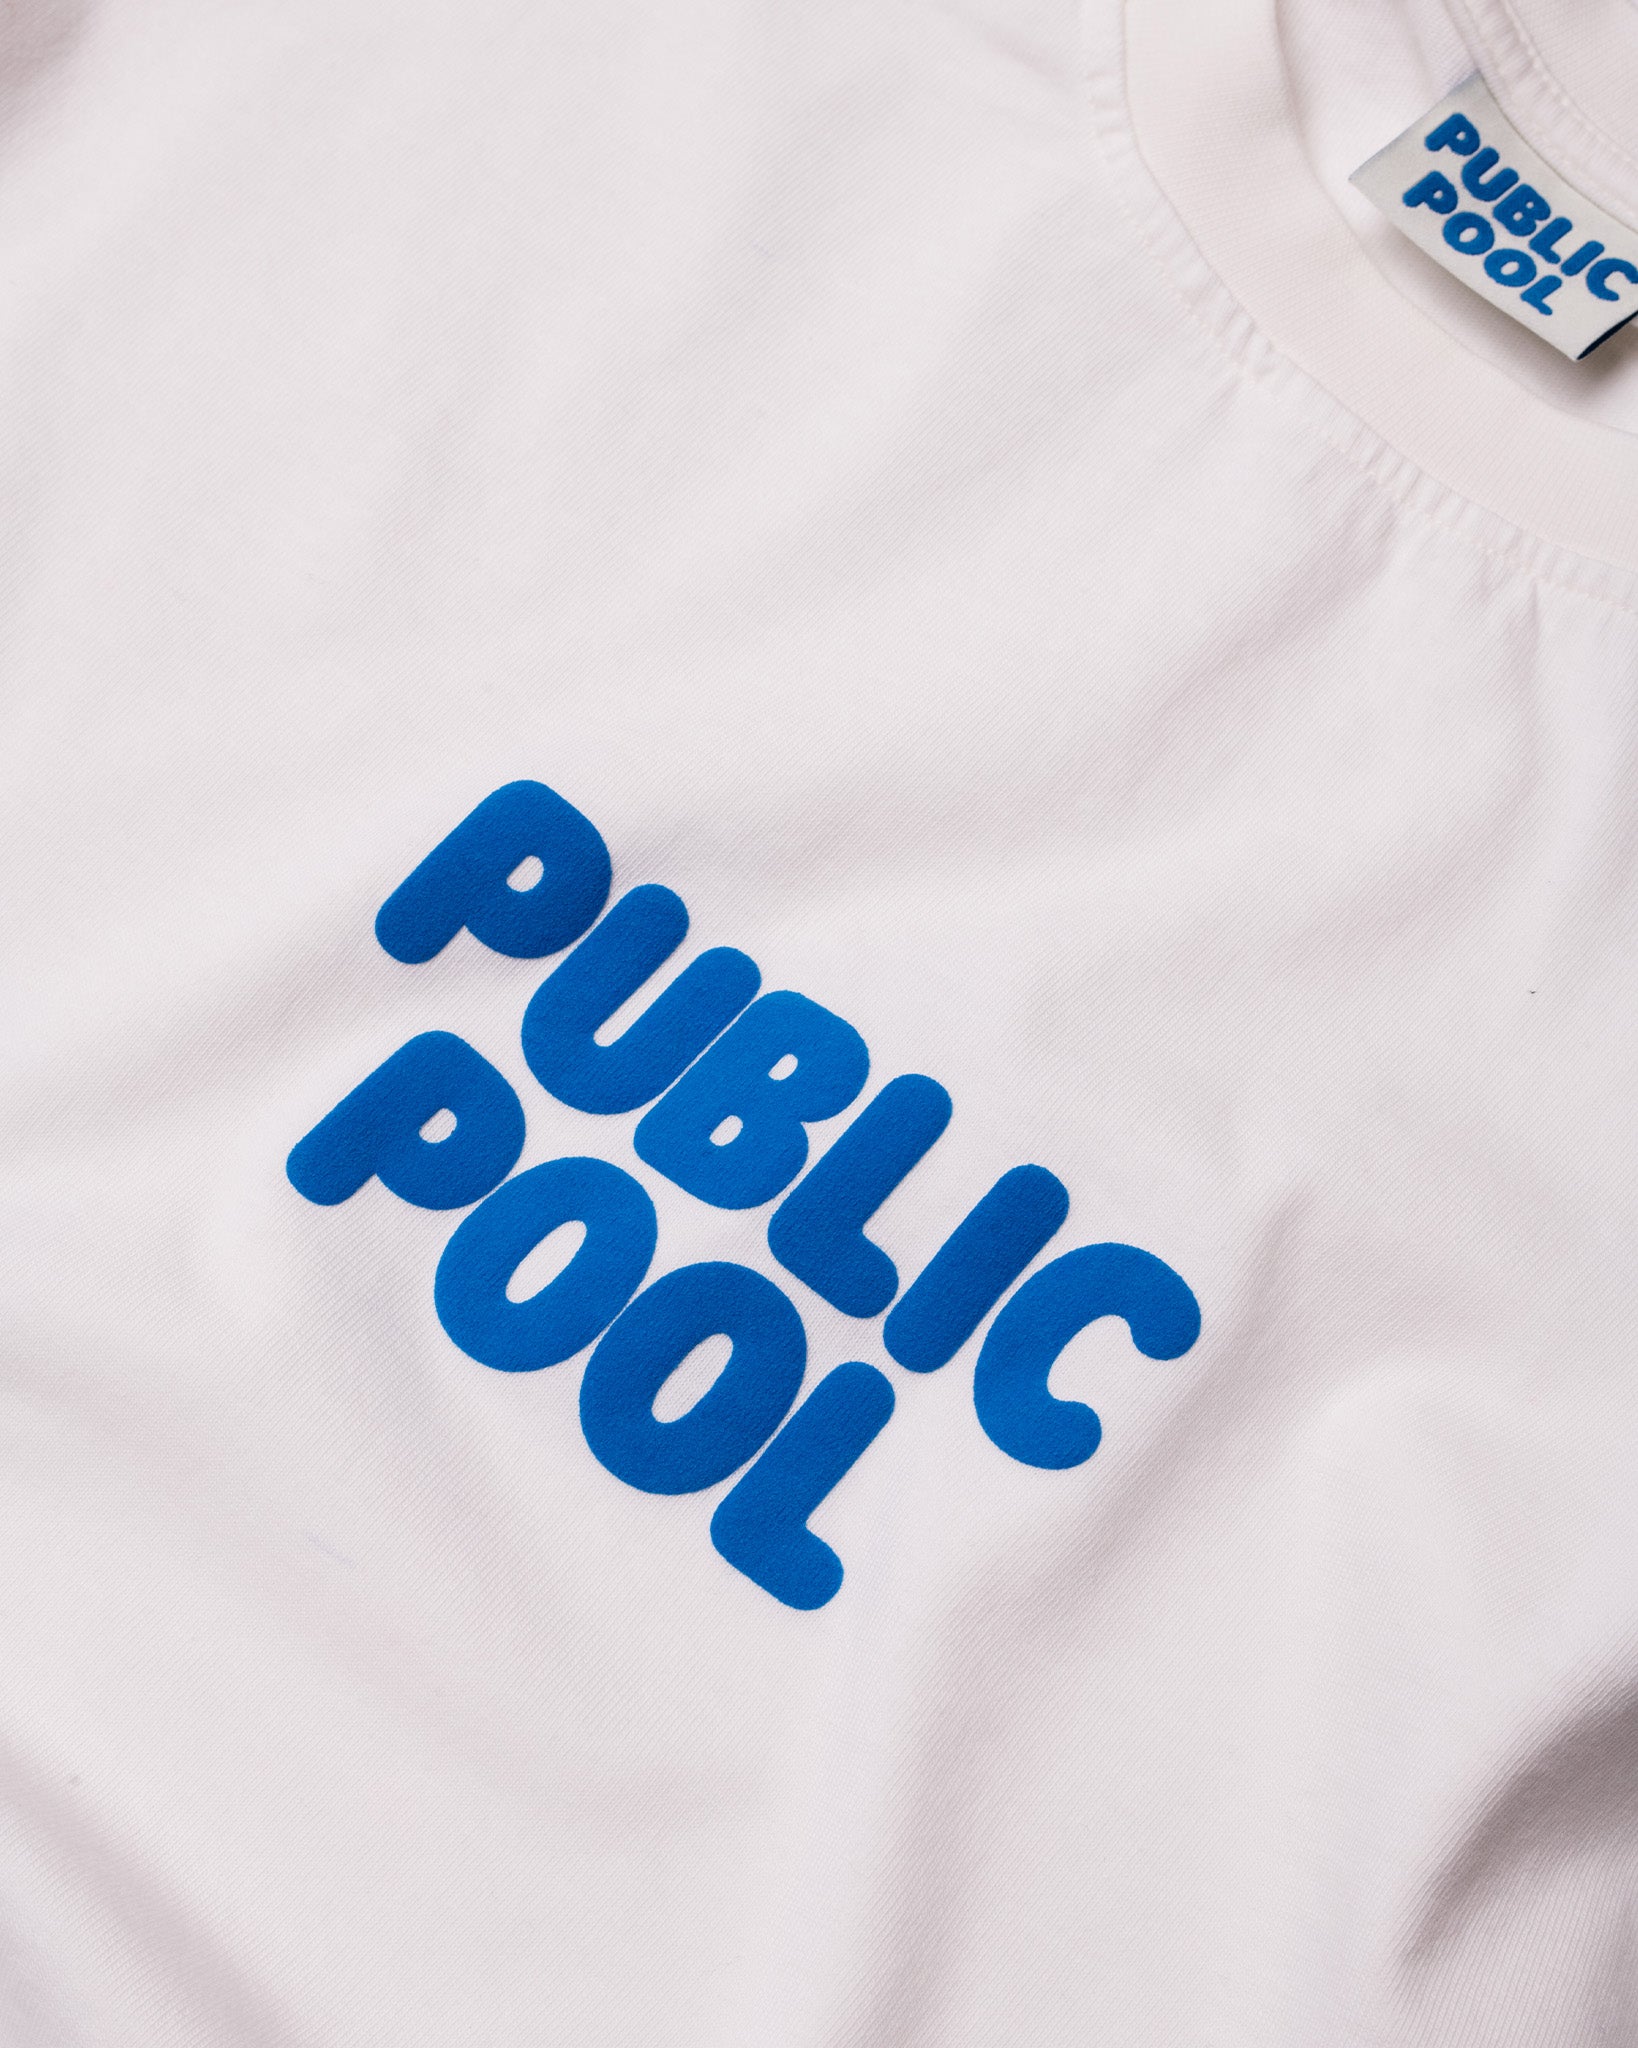 An image of the blue Public Pool logo on a white shirt. 